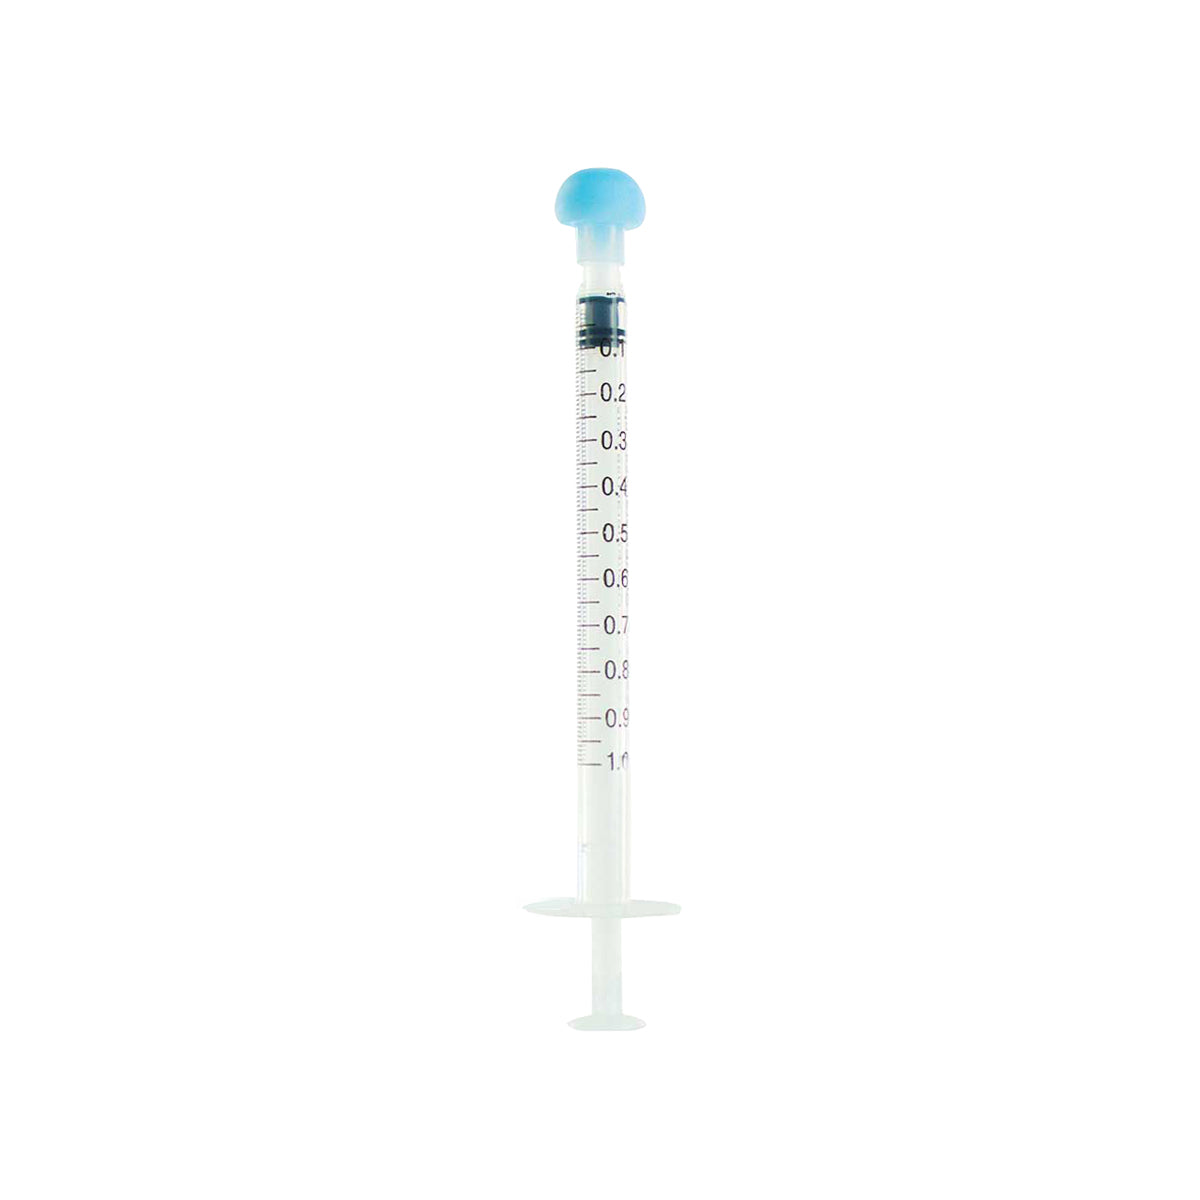 Concentrate Syringe | Oral Concentrate Syringes | 1ml - 0.1ml Increments - 100 Count Syringe Biohazard Inc   